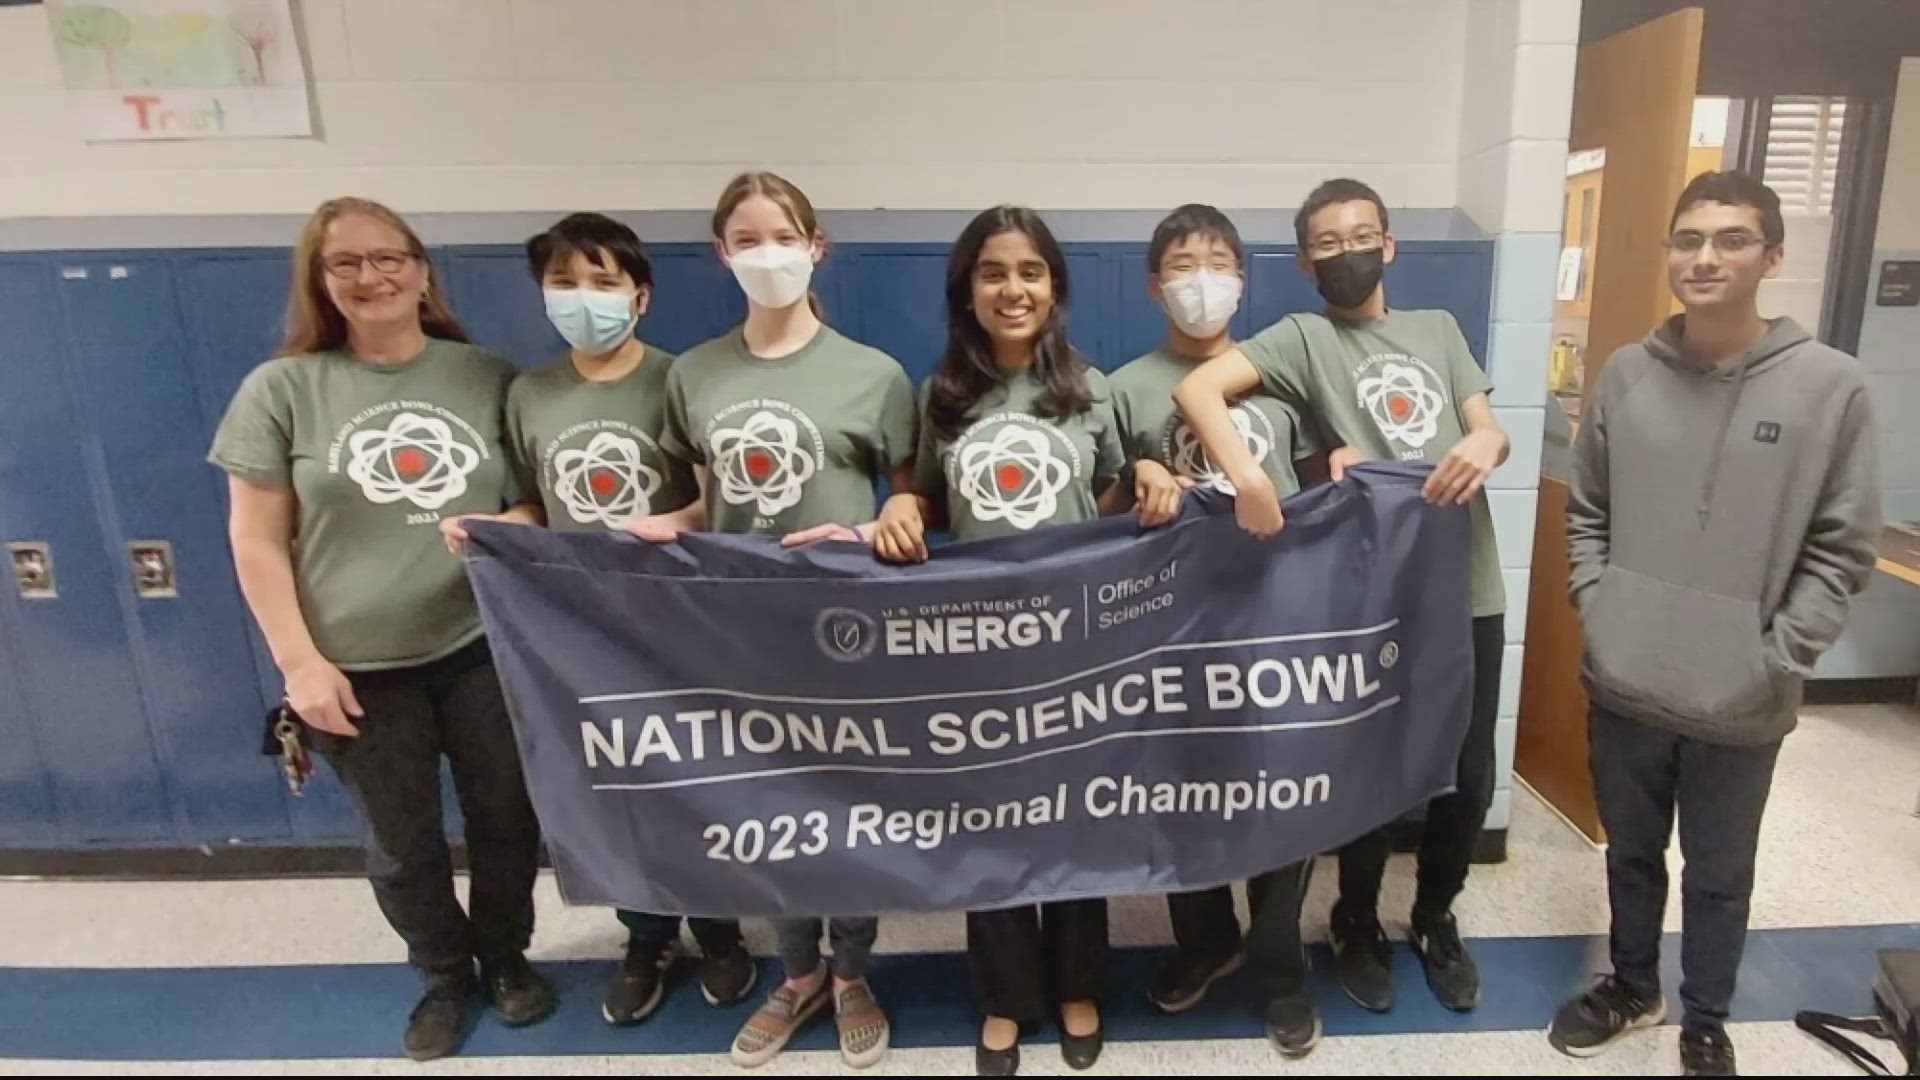 A team of scholars from Rockville's Robert Frost Middle School is going for the win.